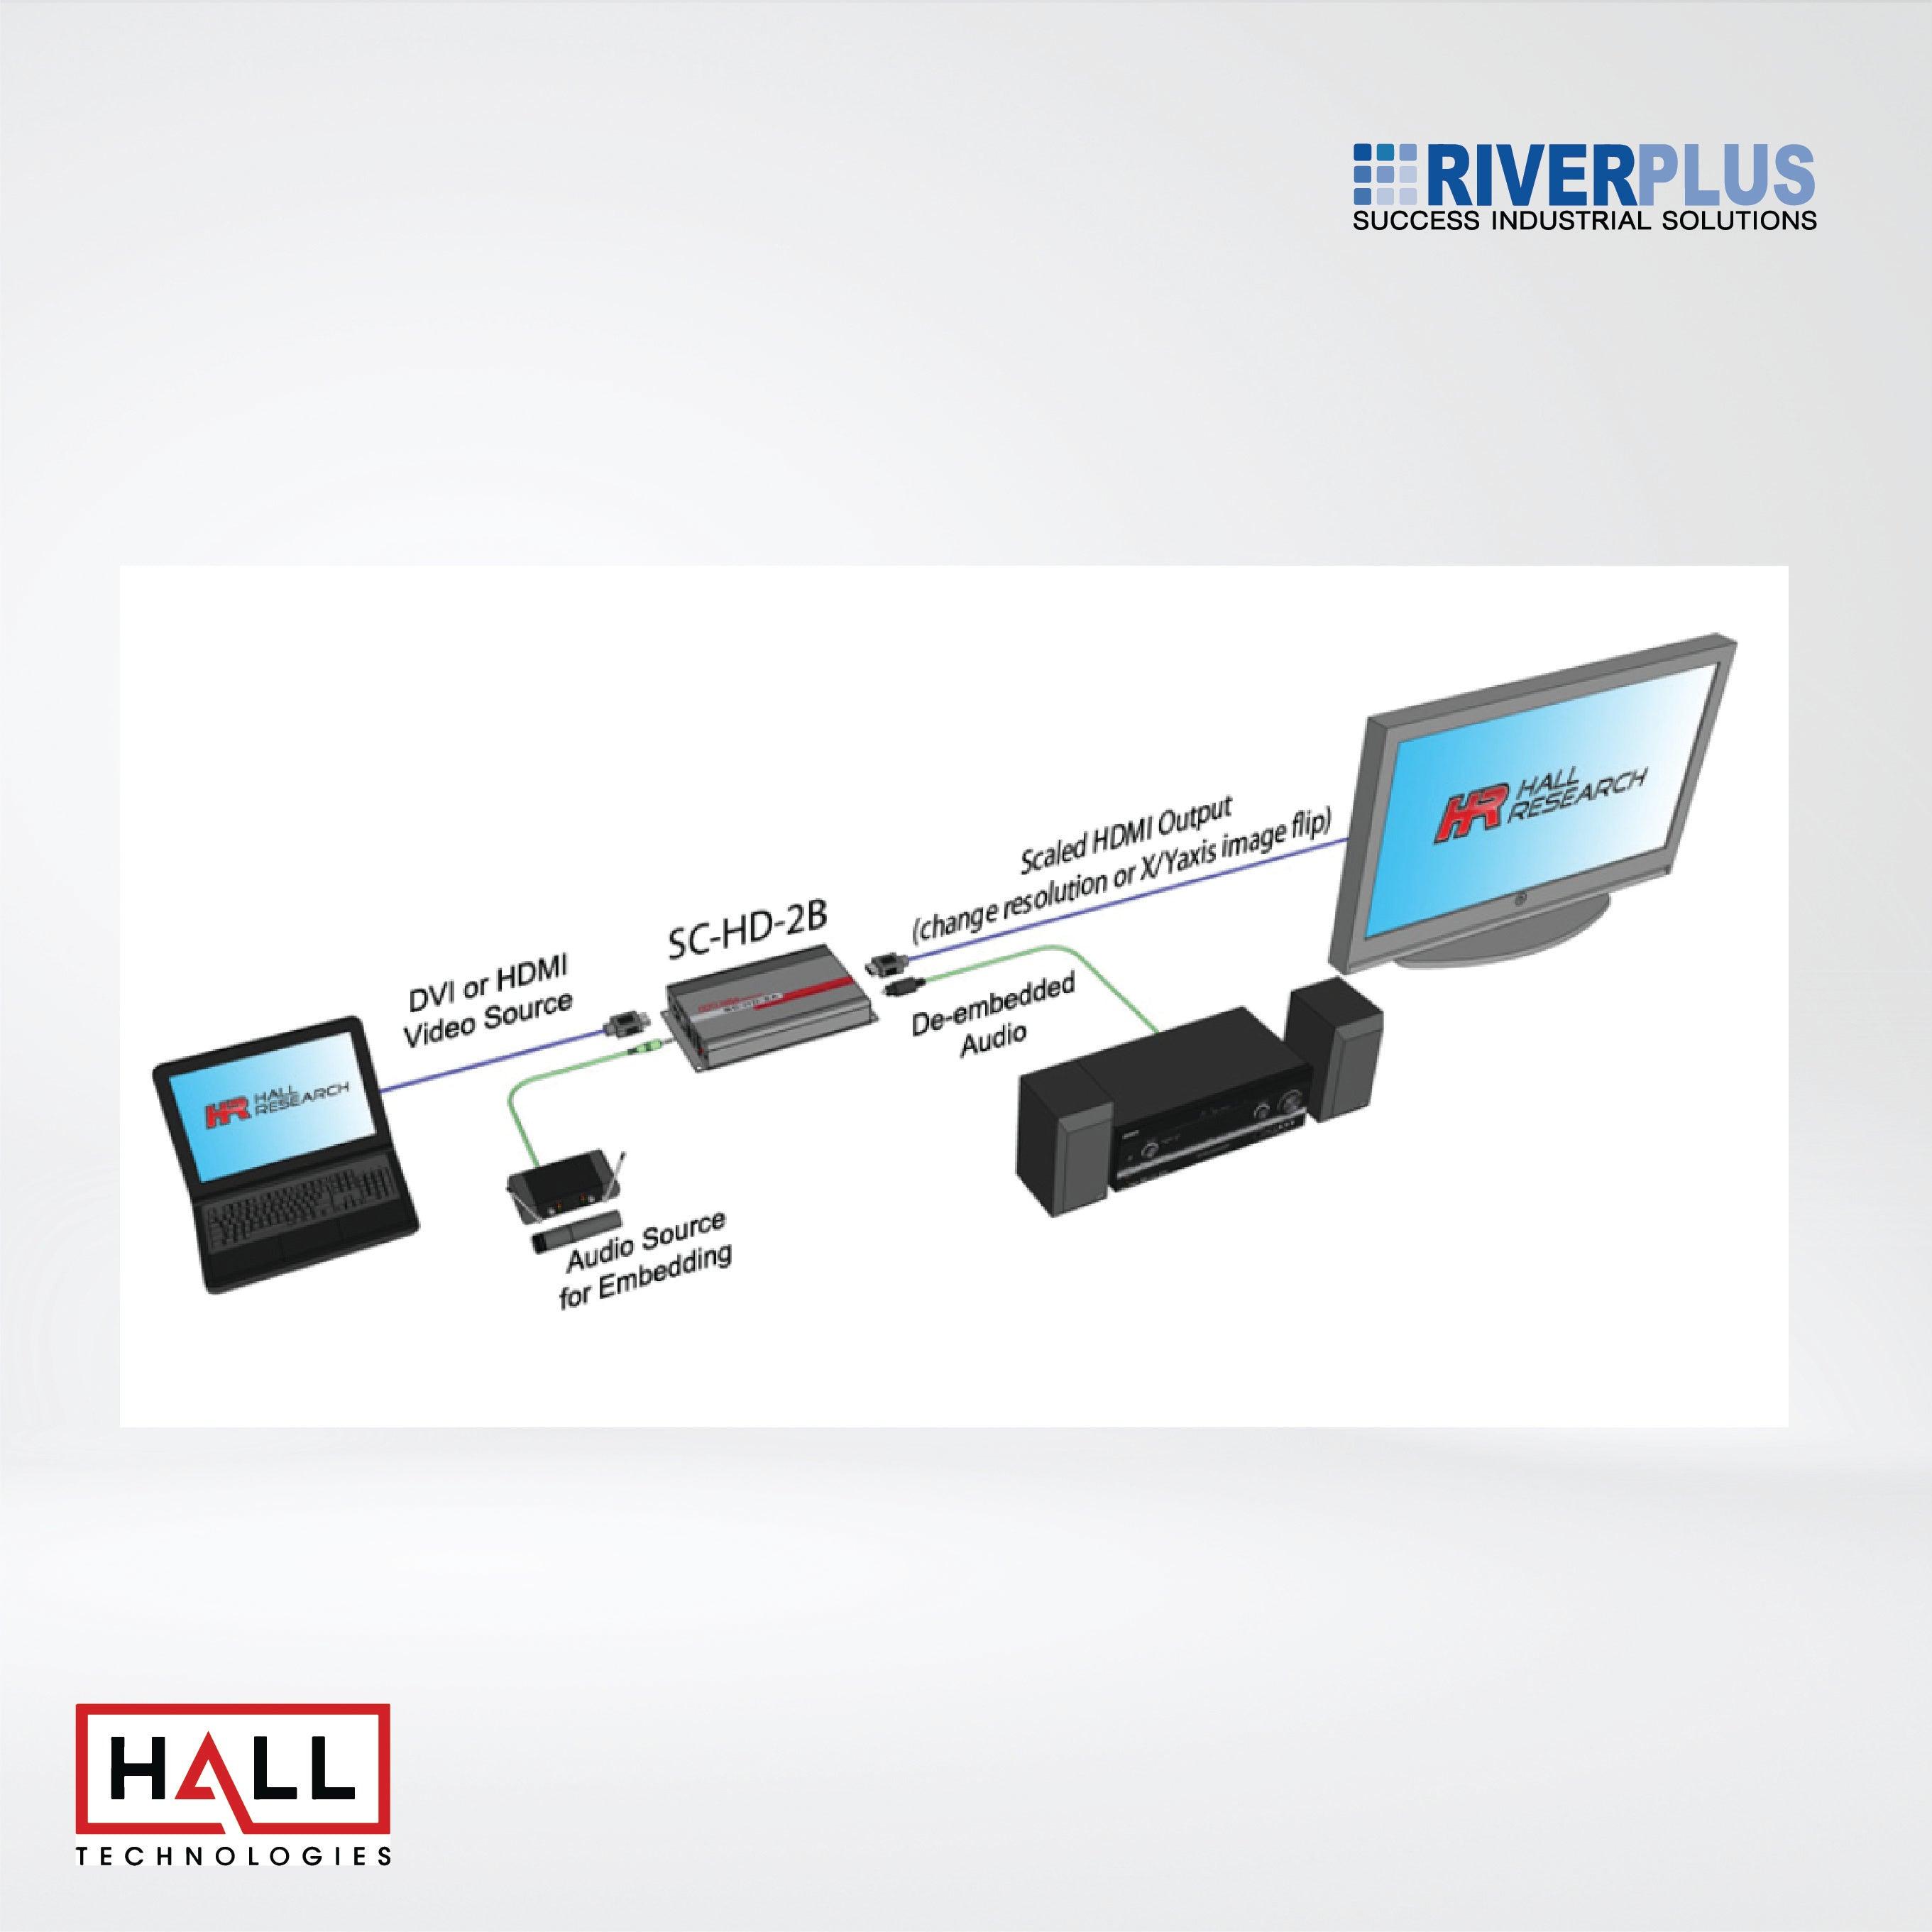 SC-HD-2B 4K/60Hz HDMI Scaler with Audio Embed/Extract & Image Flip Capability - Riverplus